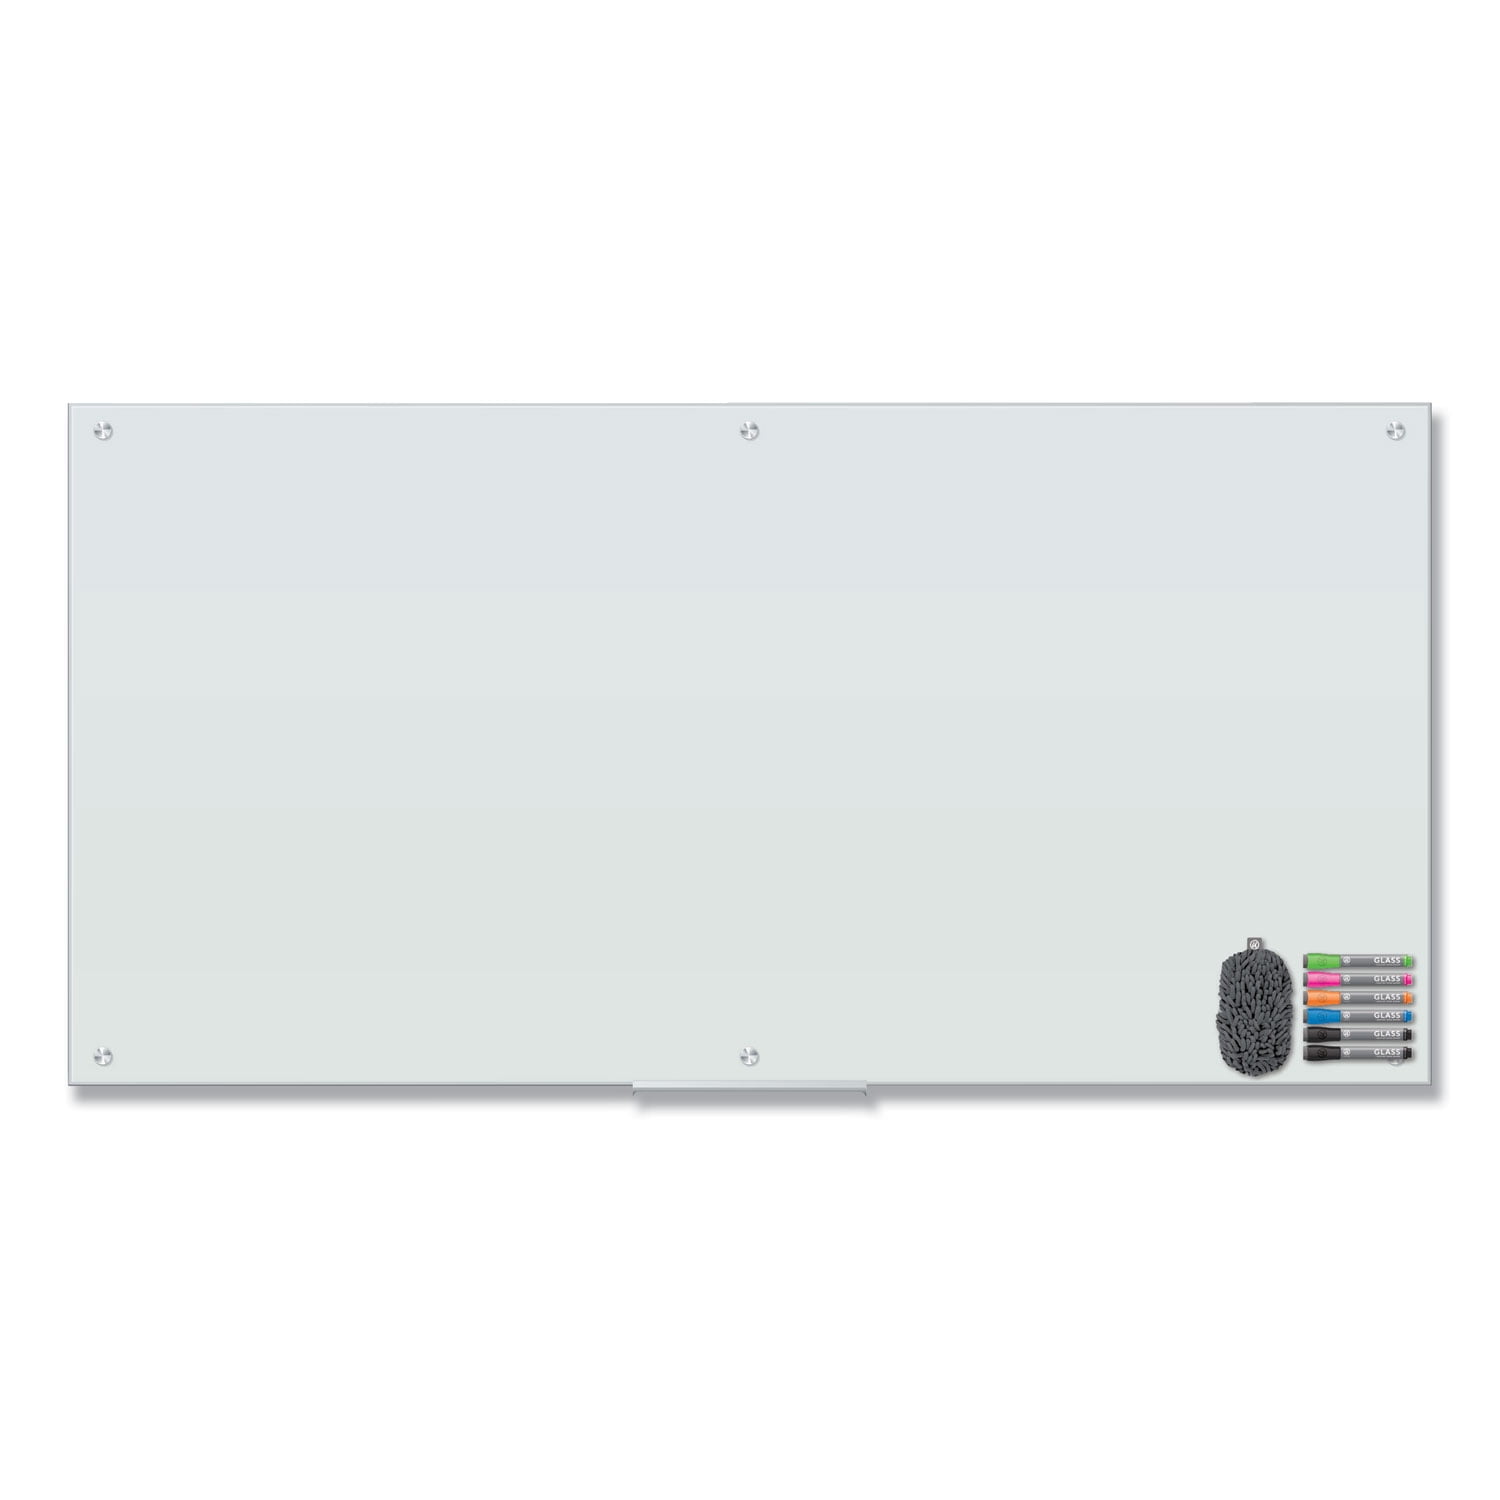 Large Whiteboard for Wall, maxtek 72 x 48 inches Magnetic Dry Erase Board,  6' x 4' Wall-Mounted White Board Message Memo Marker Board Foldable with